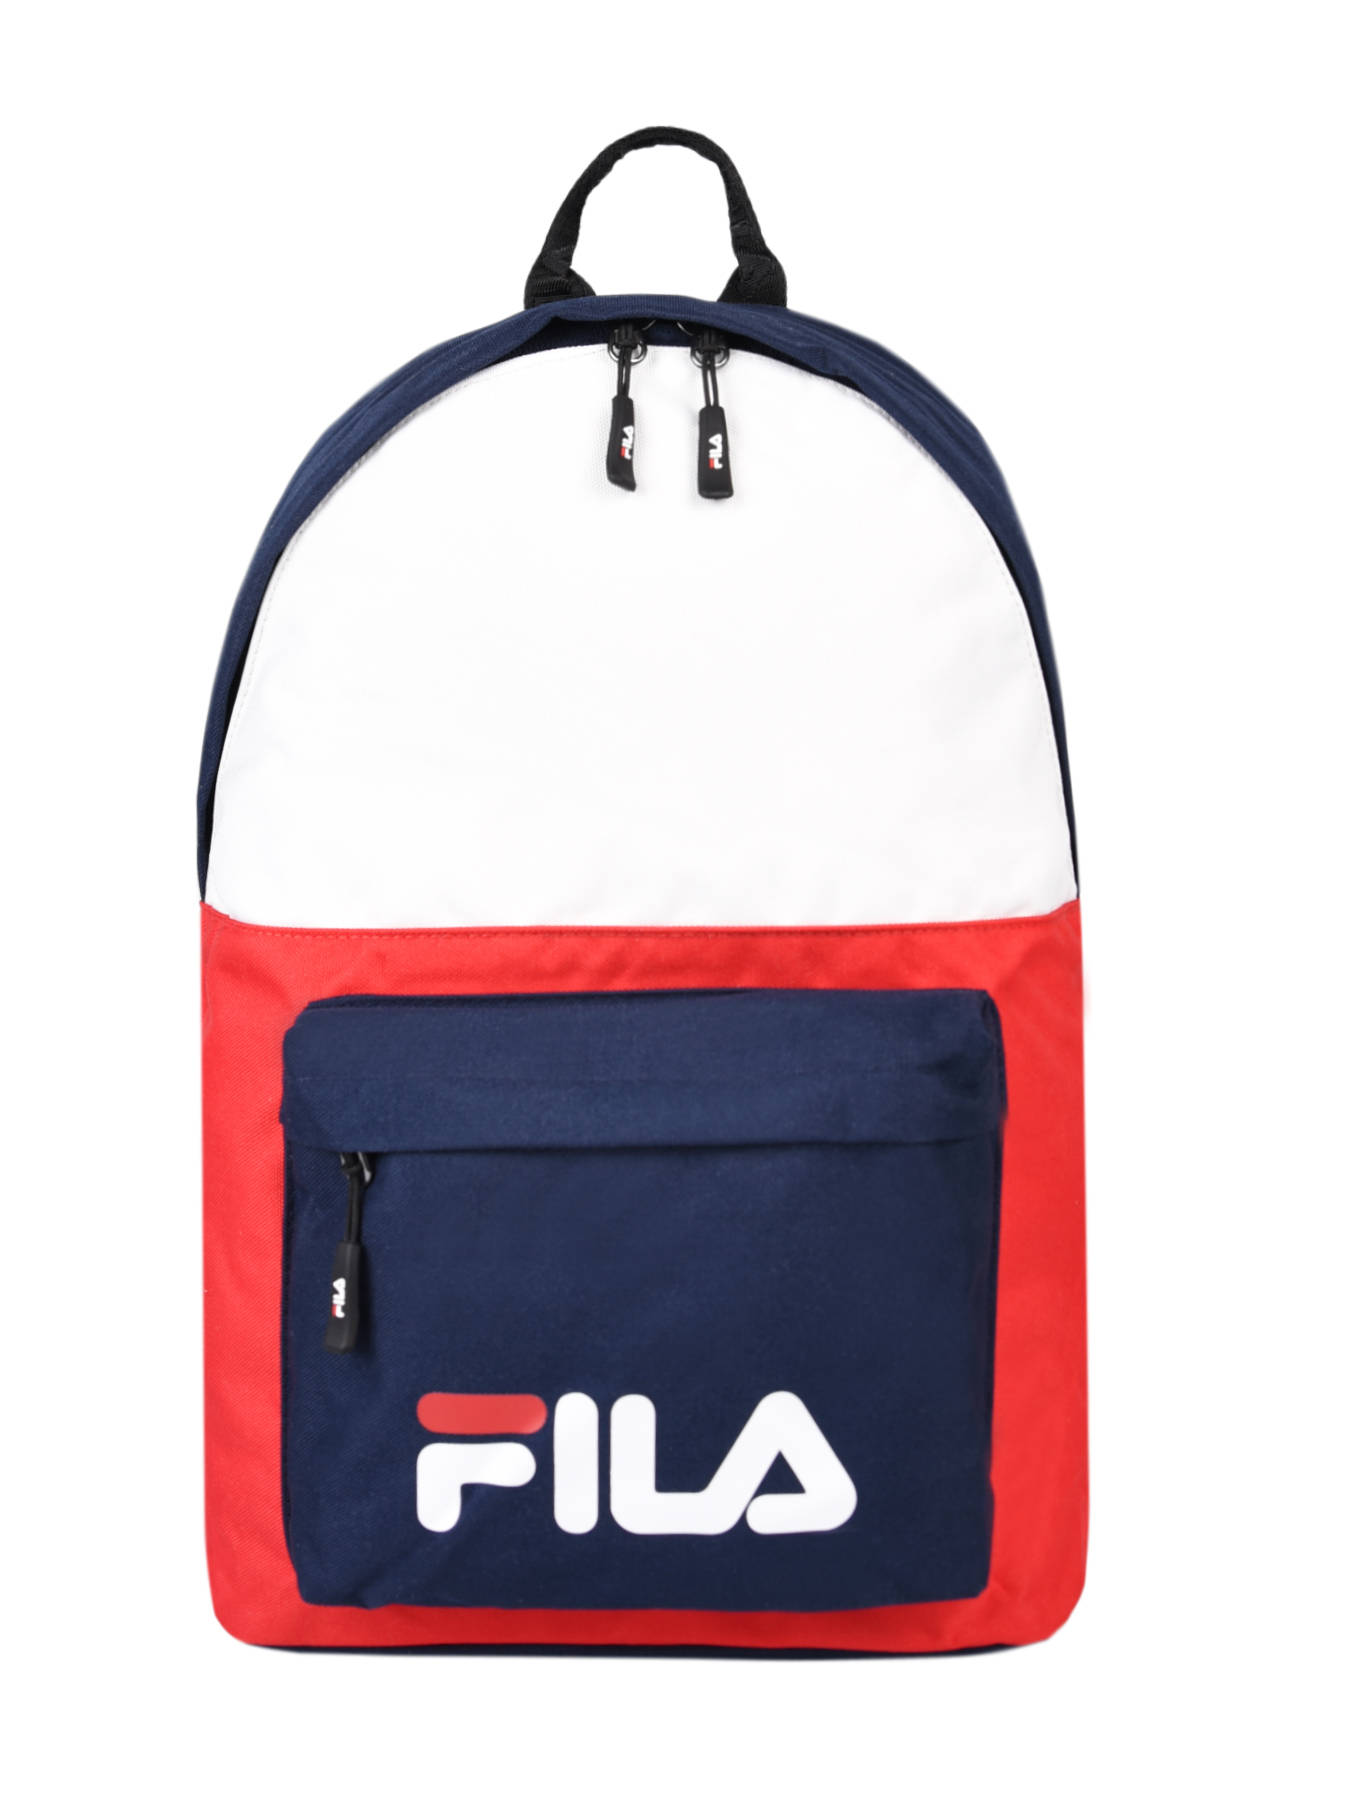 Fila Backpack 685118 - best prices